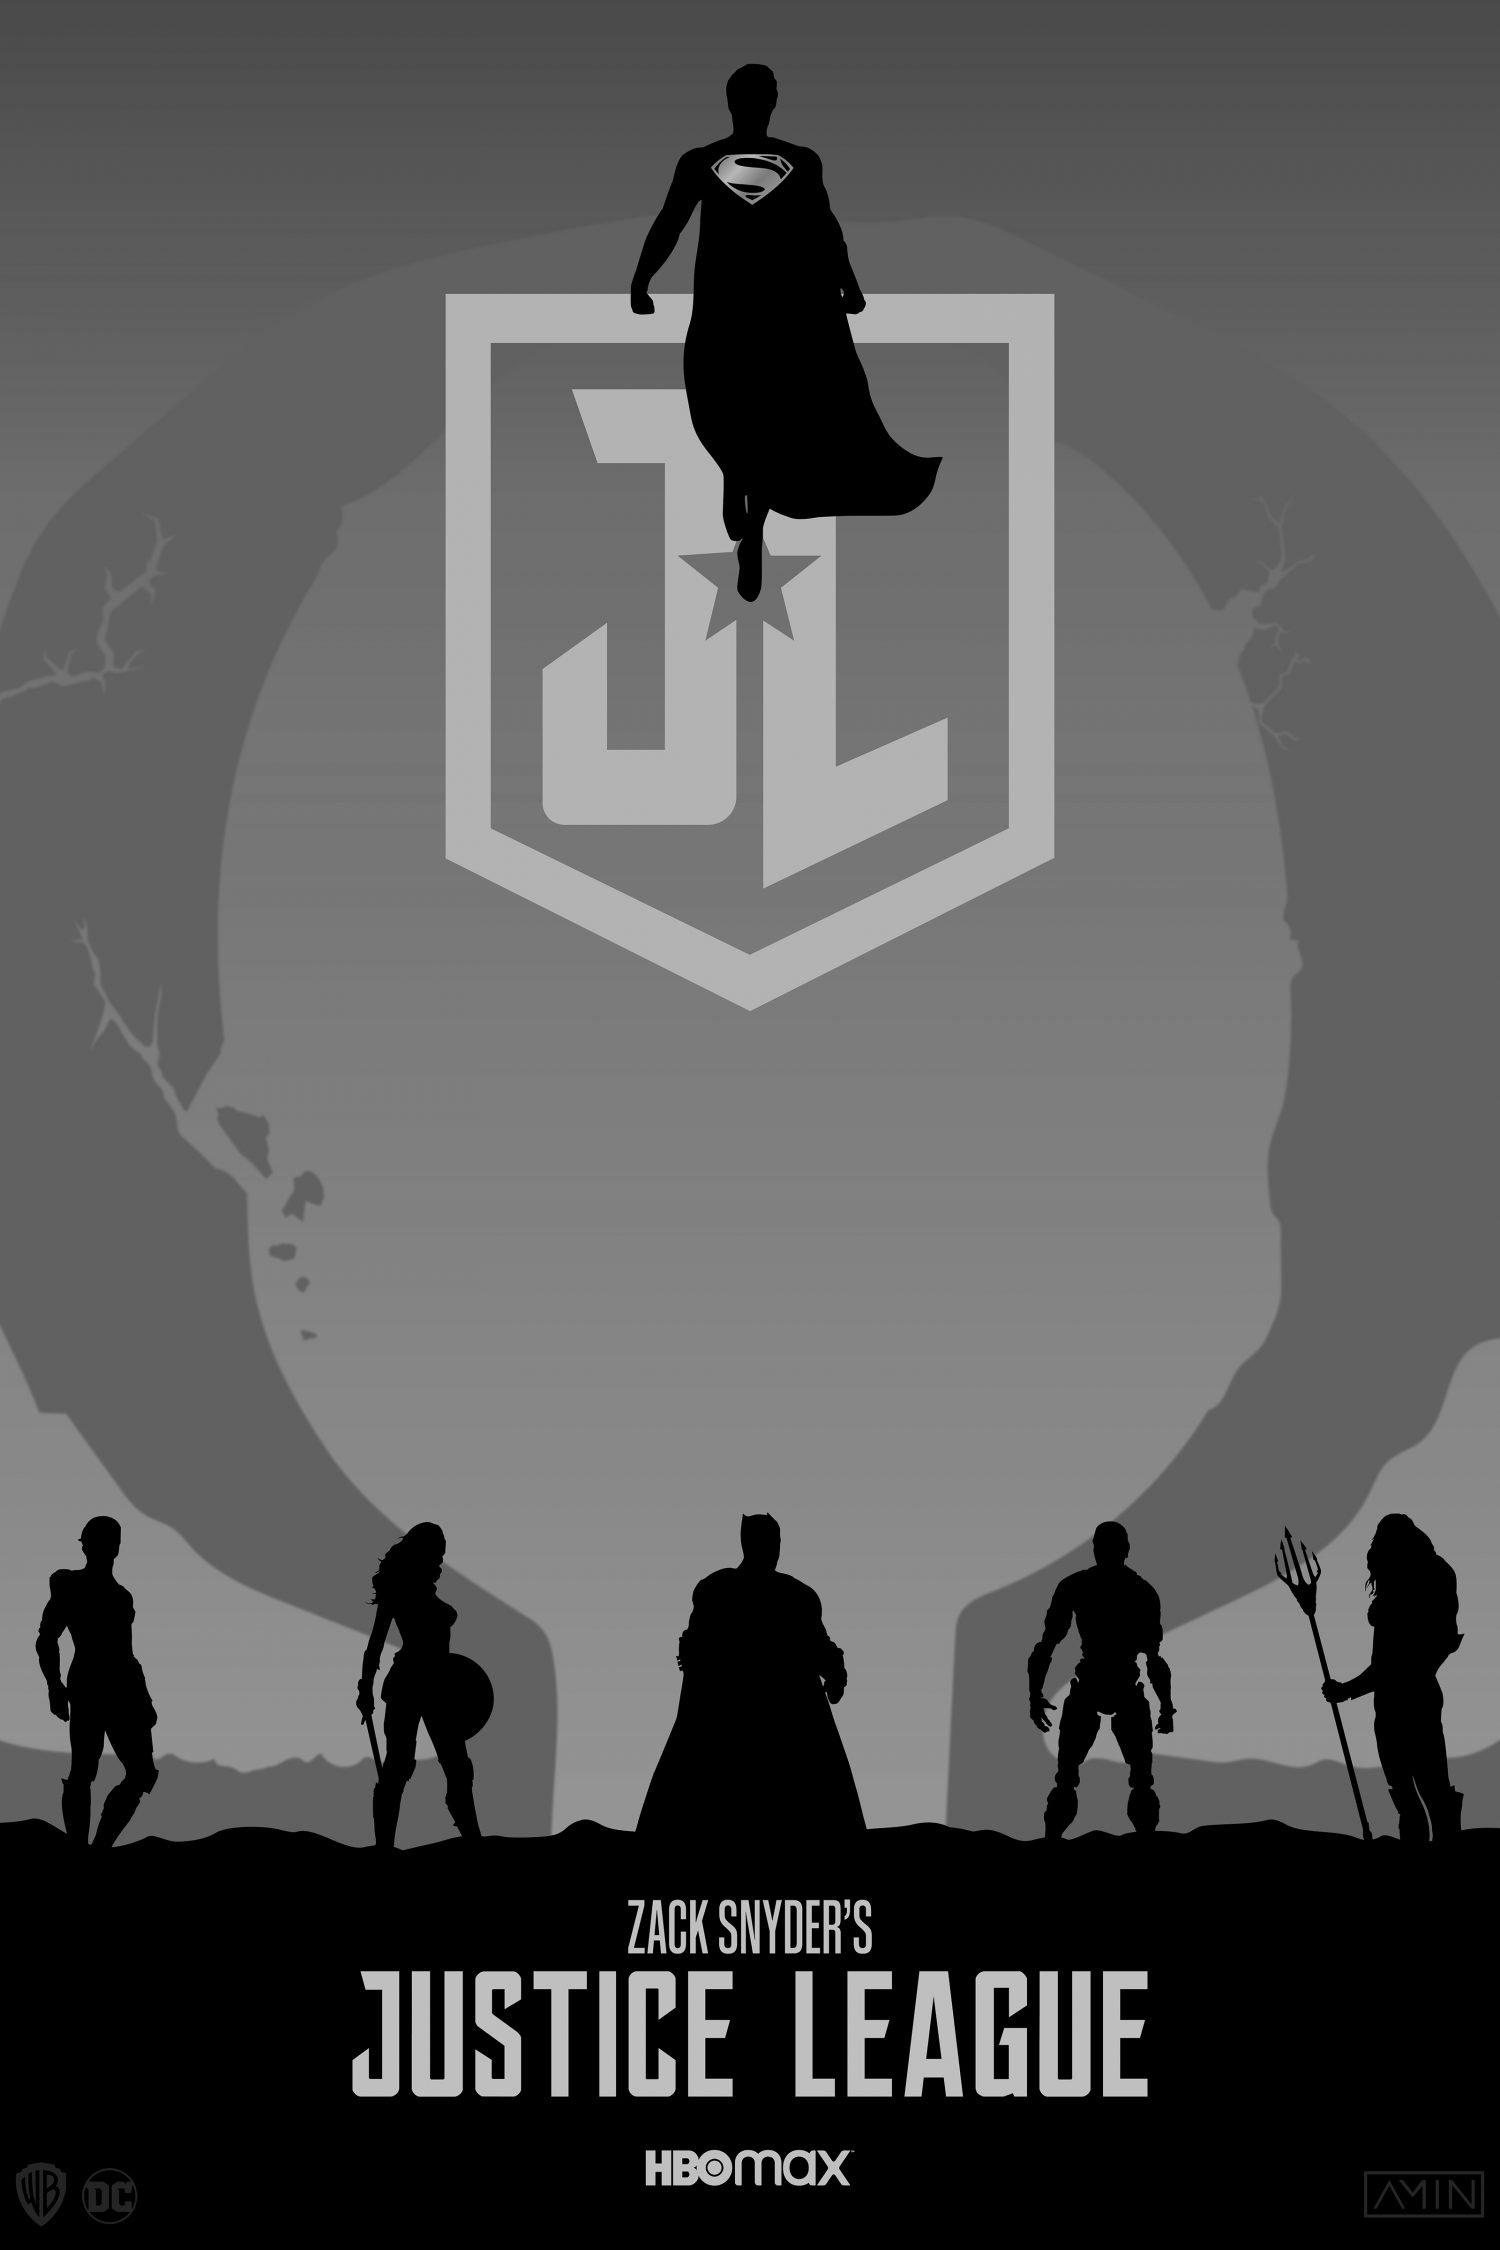 Zack Snyder's Justice League (B&W) - PosterSpy